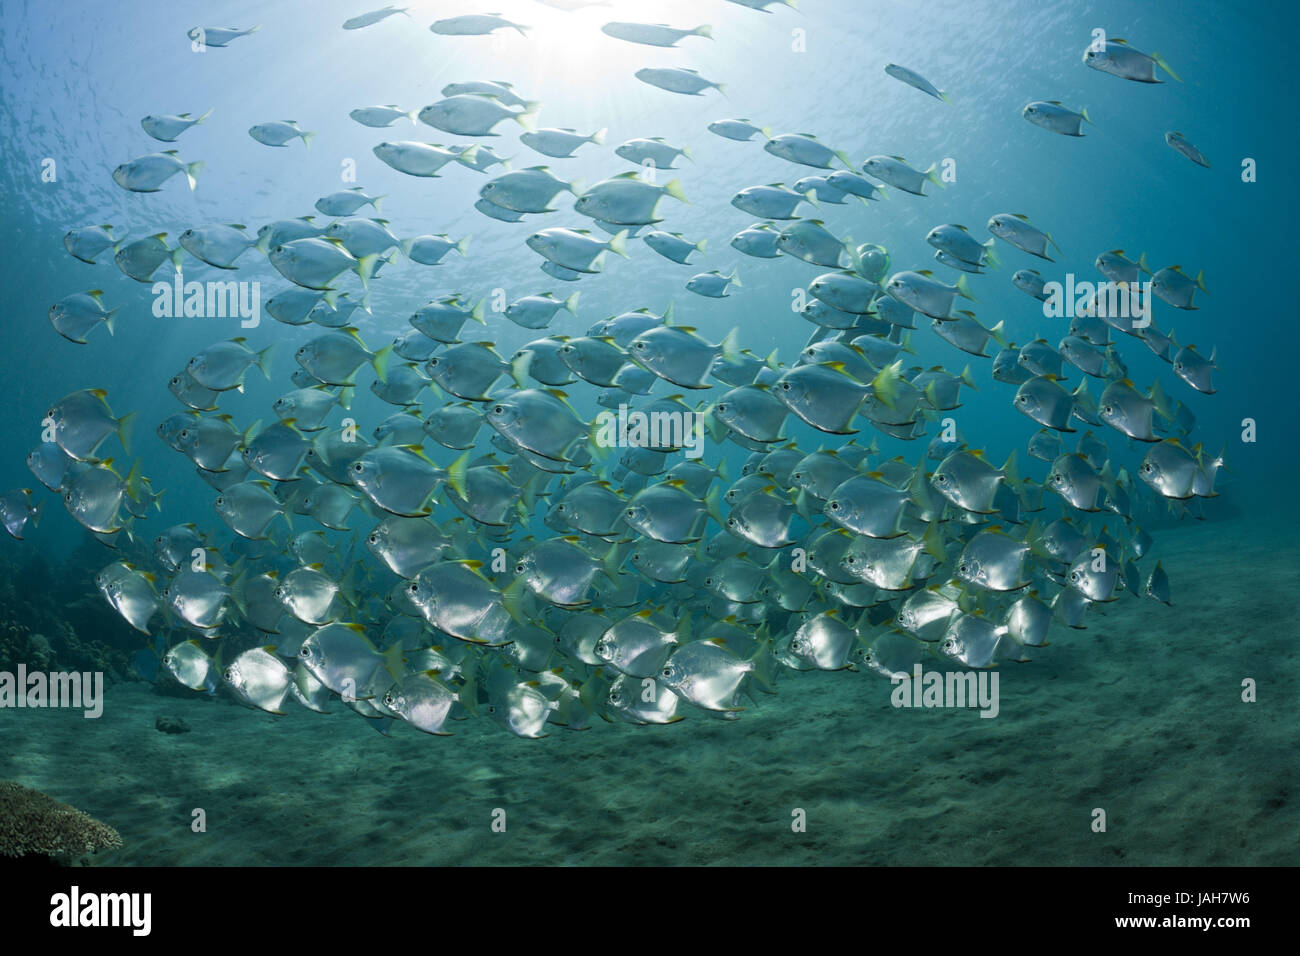 Dream silver fin leaves,Monodactylus argenteus,Amed,Bali,Indonesia, Stock Photo